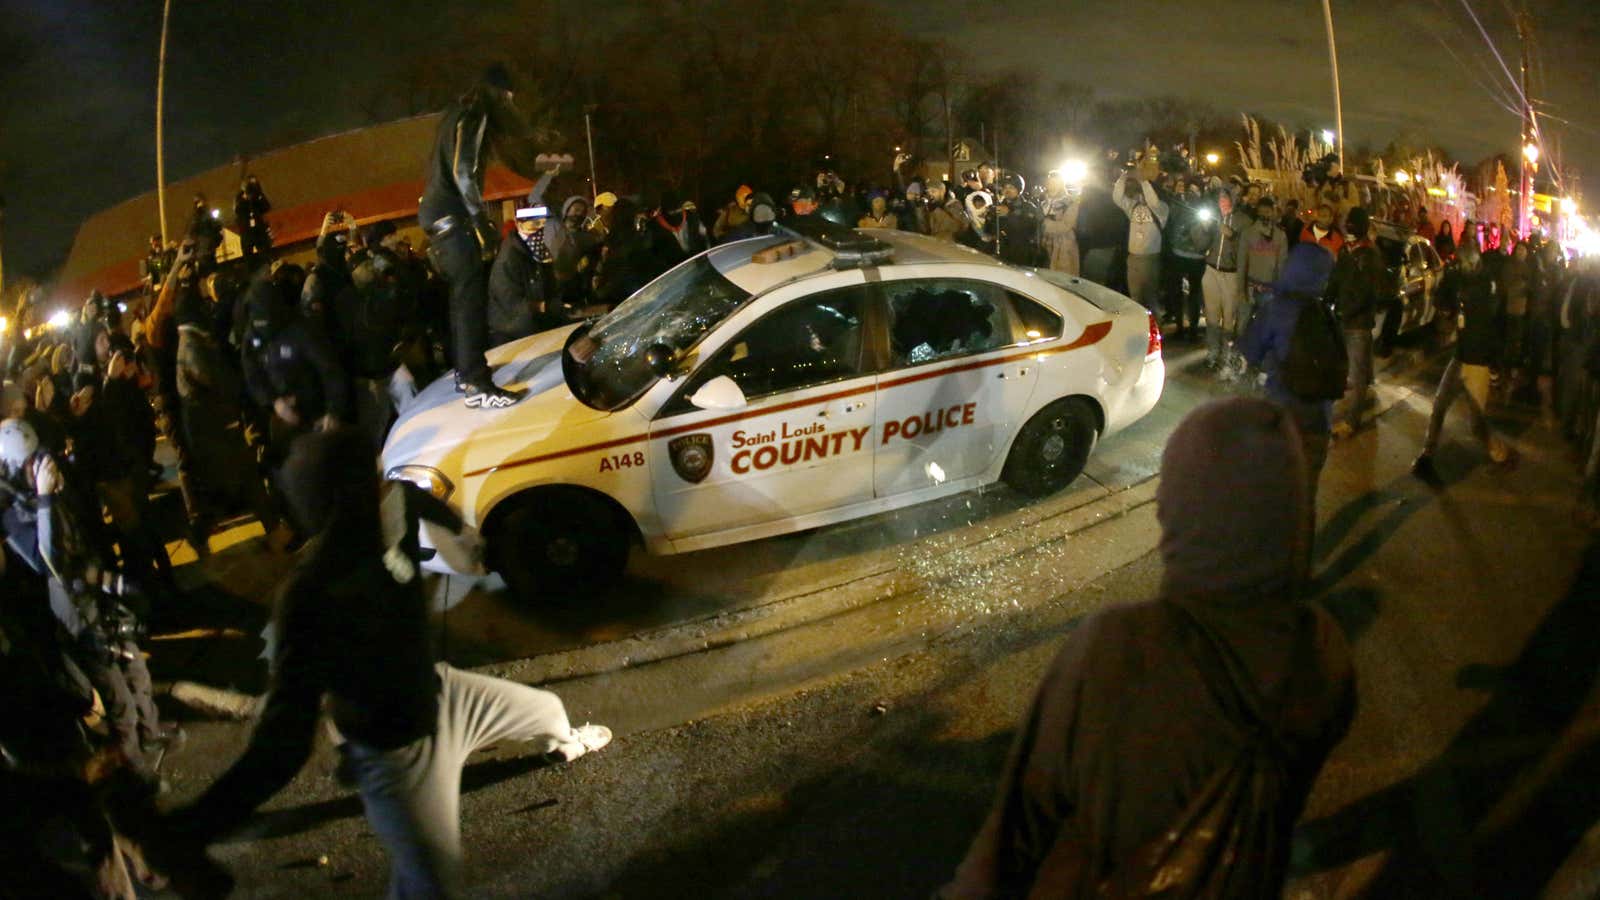 Watch these live streams from Ferguson, Missouri, as the city reacts